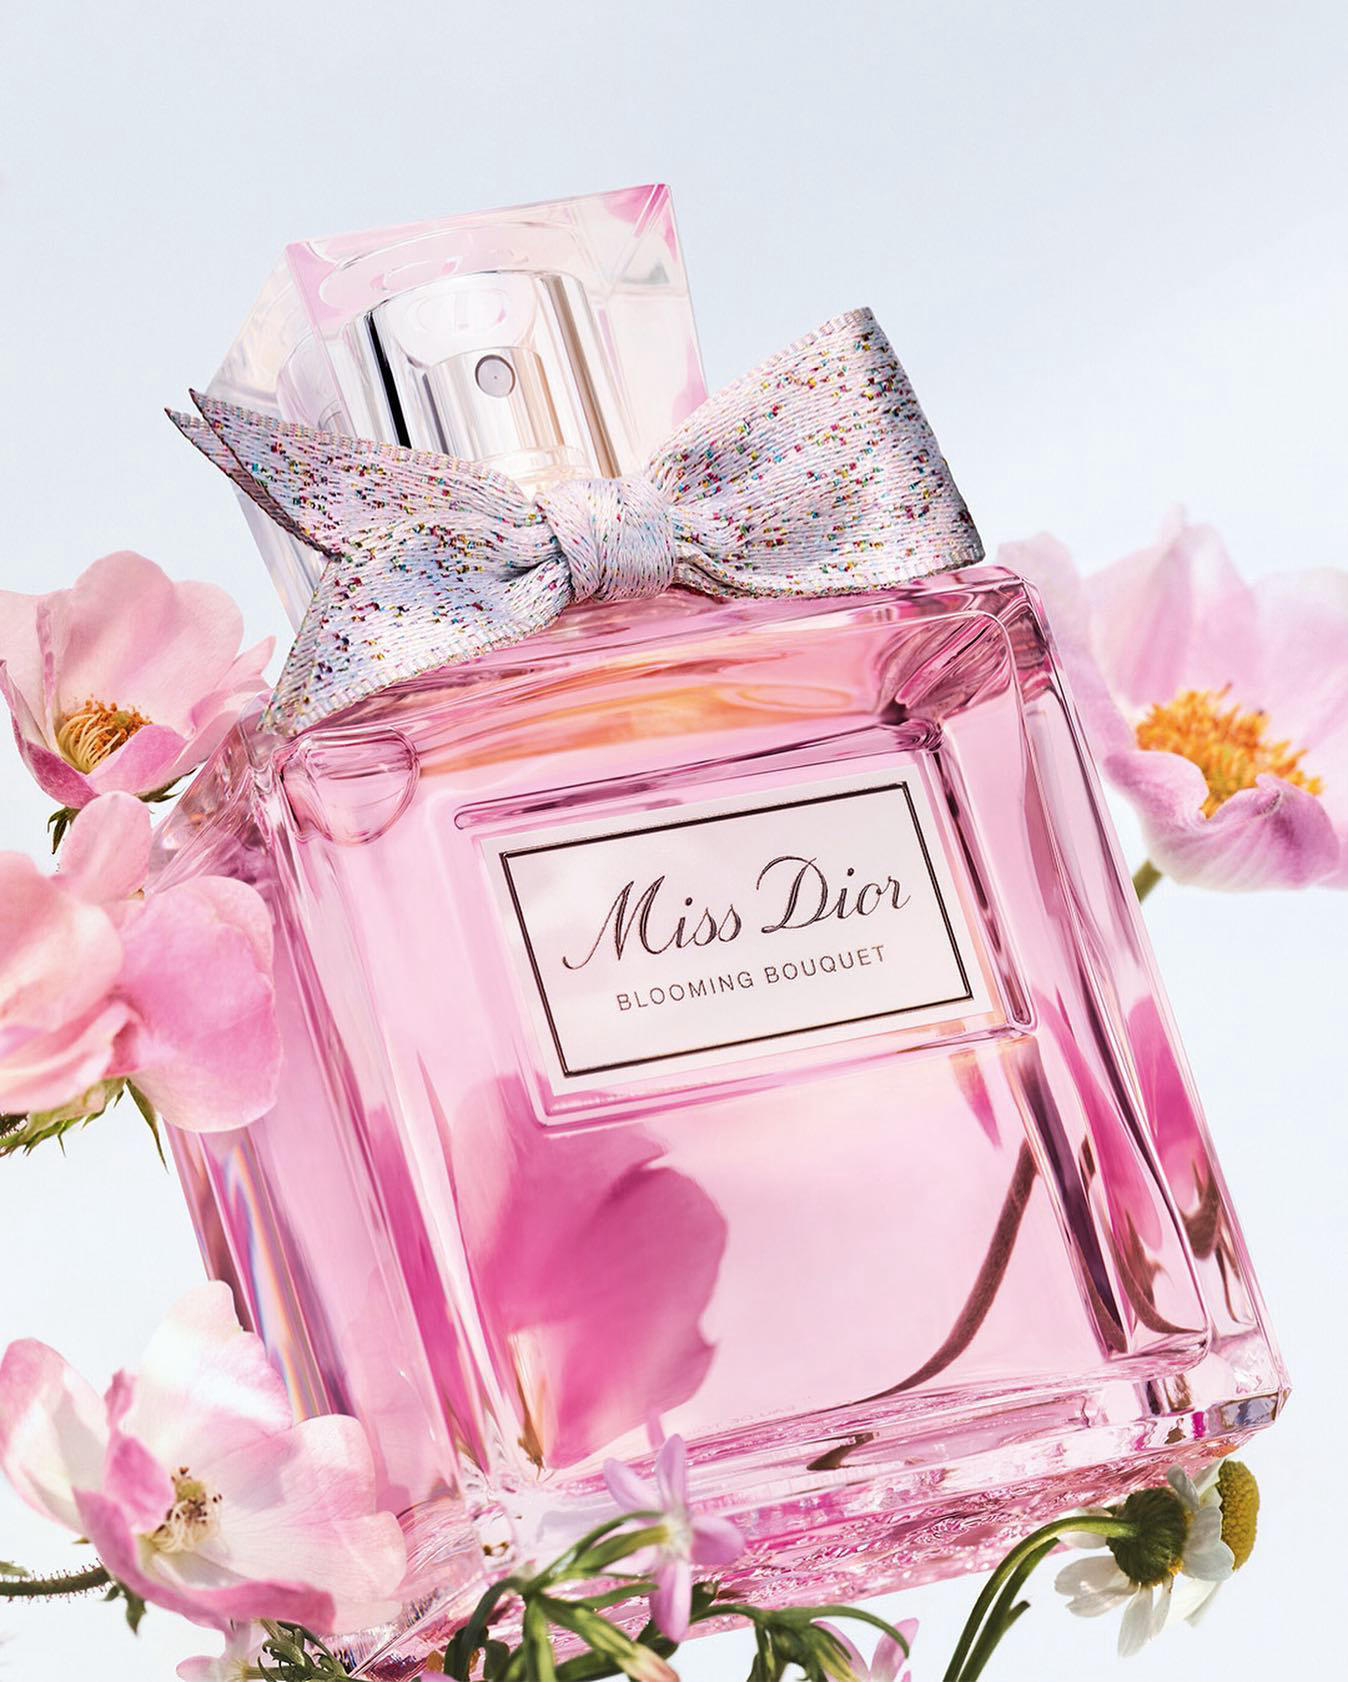 The Miss Dior Blooming Bouquet fragrance is housed in an exquisite jacquard ribbon woven from 368 th